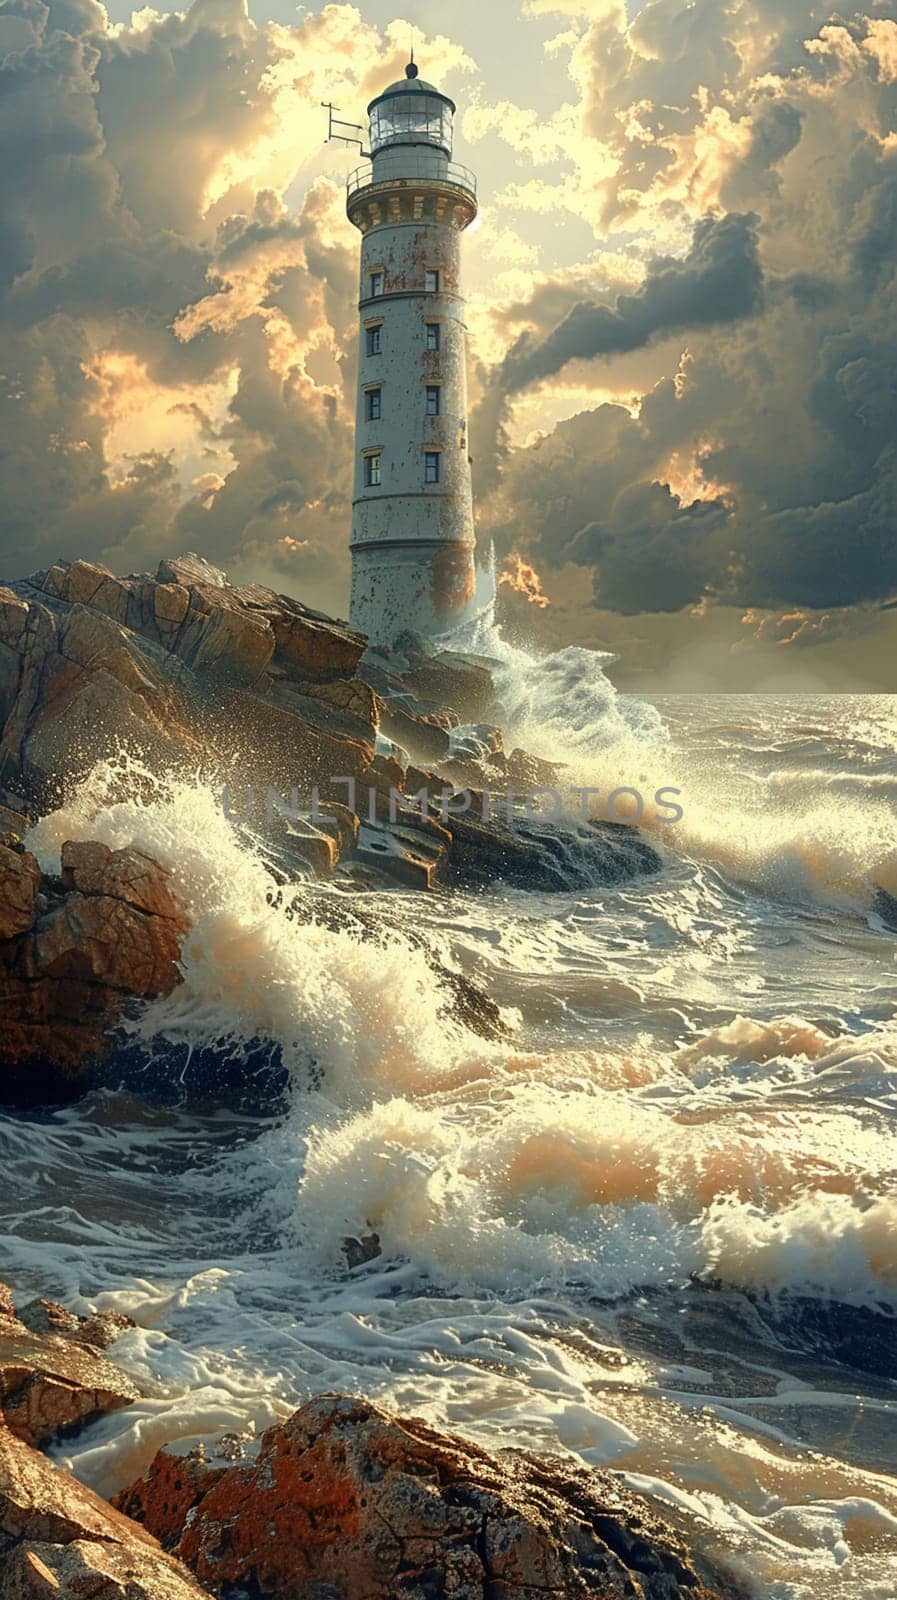 A picturesque lighthouse standing guard at the edge of the sea, evoking safety and guidance.